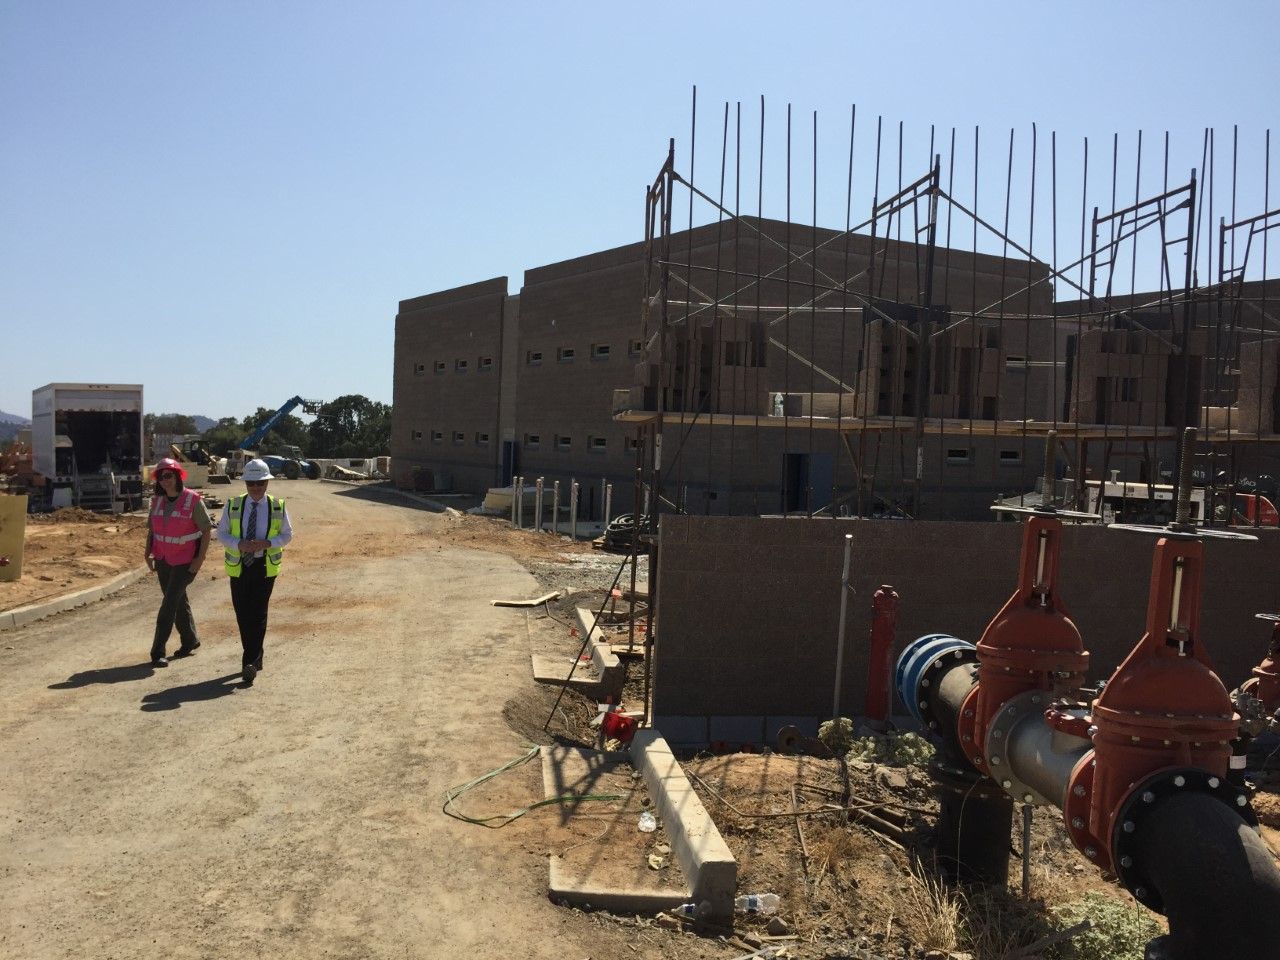 New-Tuolumne-County-Jail-construction-site-visit-Sept-10-2019-with-Lt.-Tamara-McCaig-and-Sheriff-Bill-Pooley